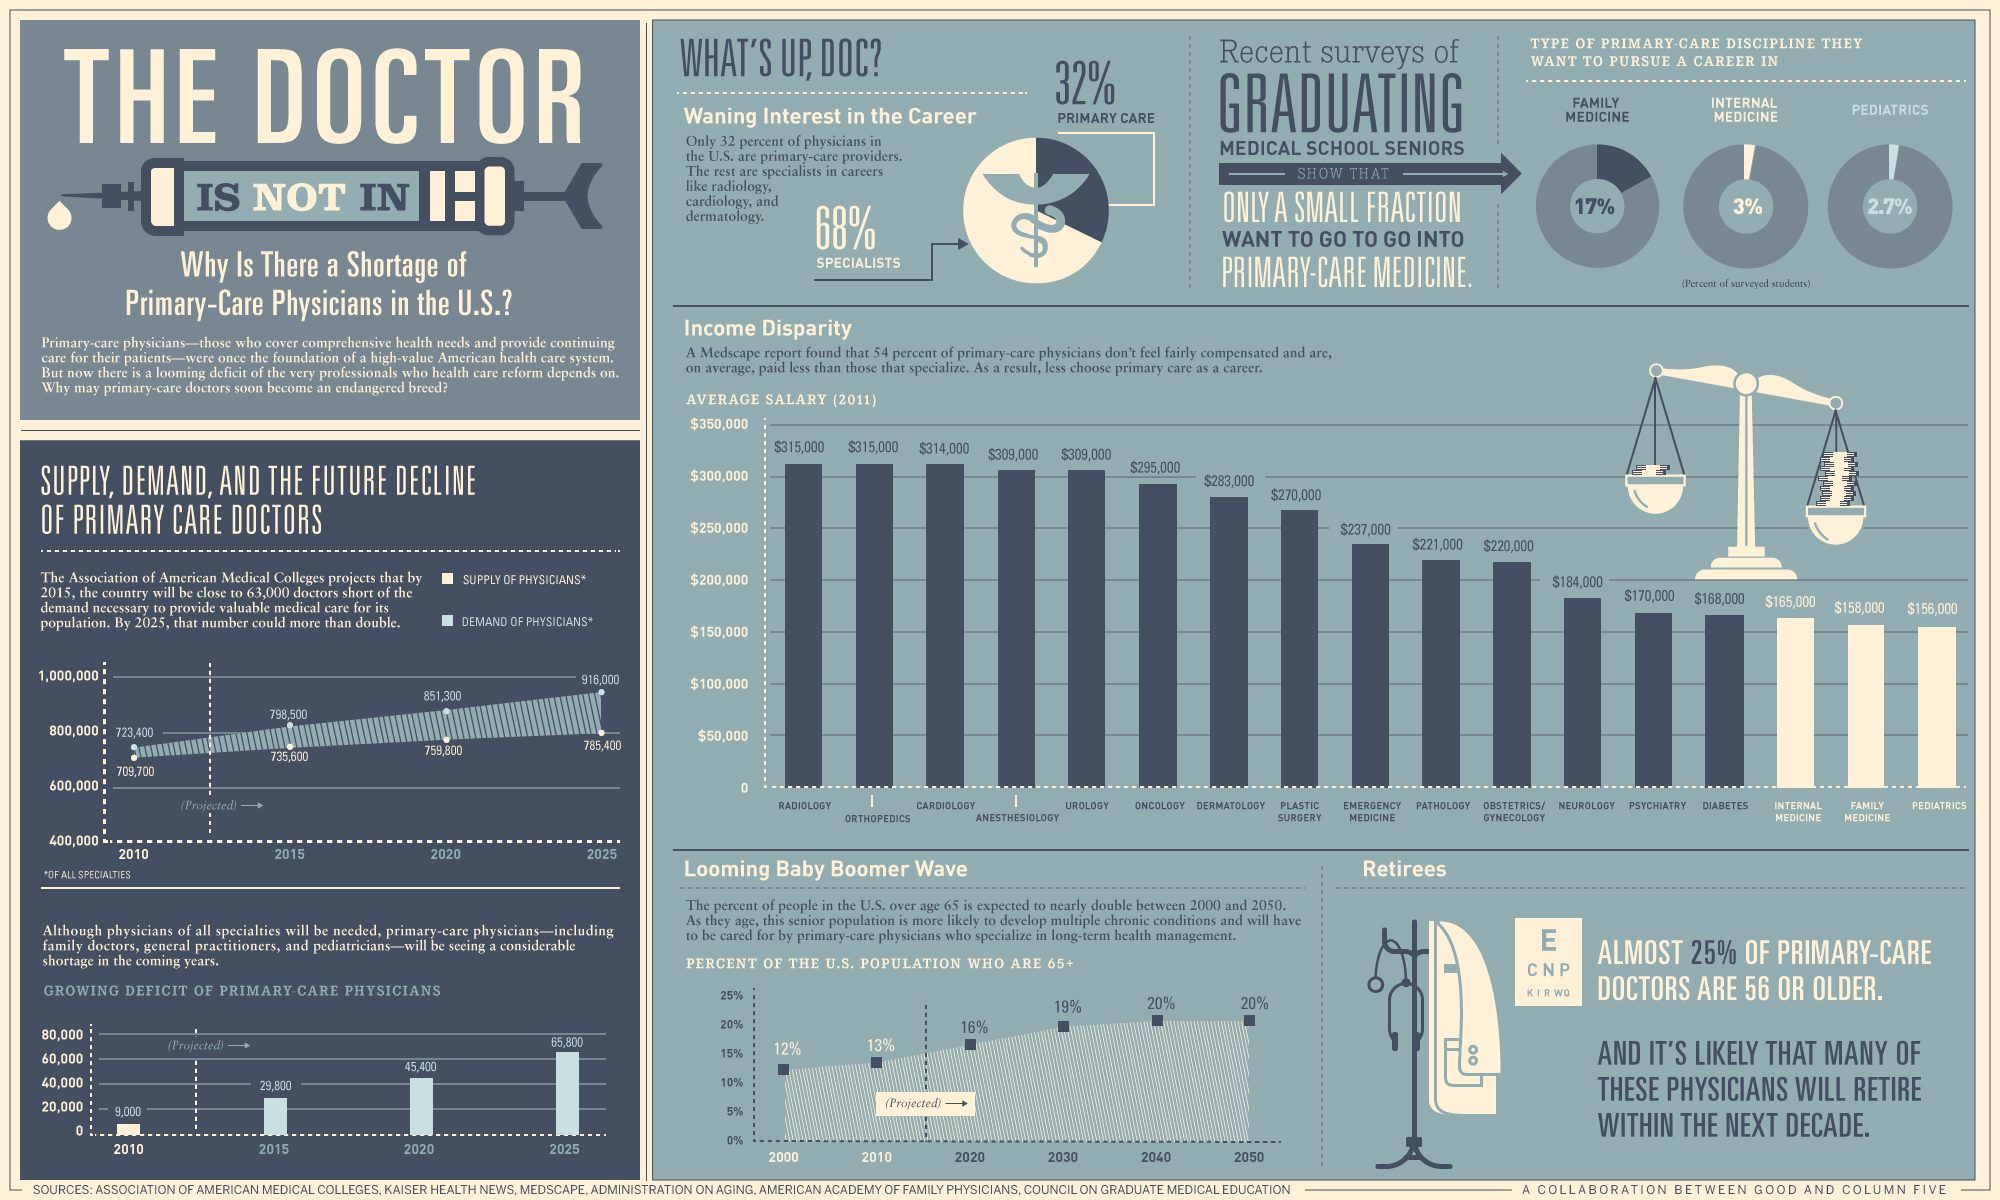 The Doctor is Not Infograph